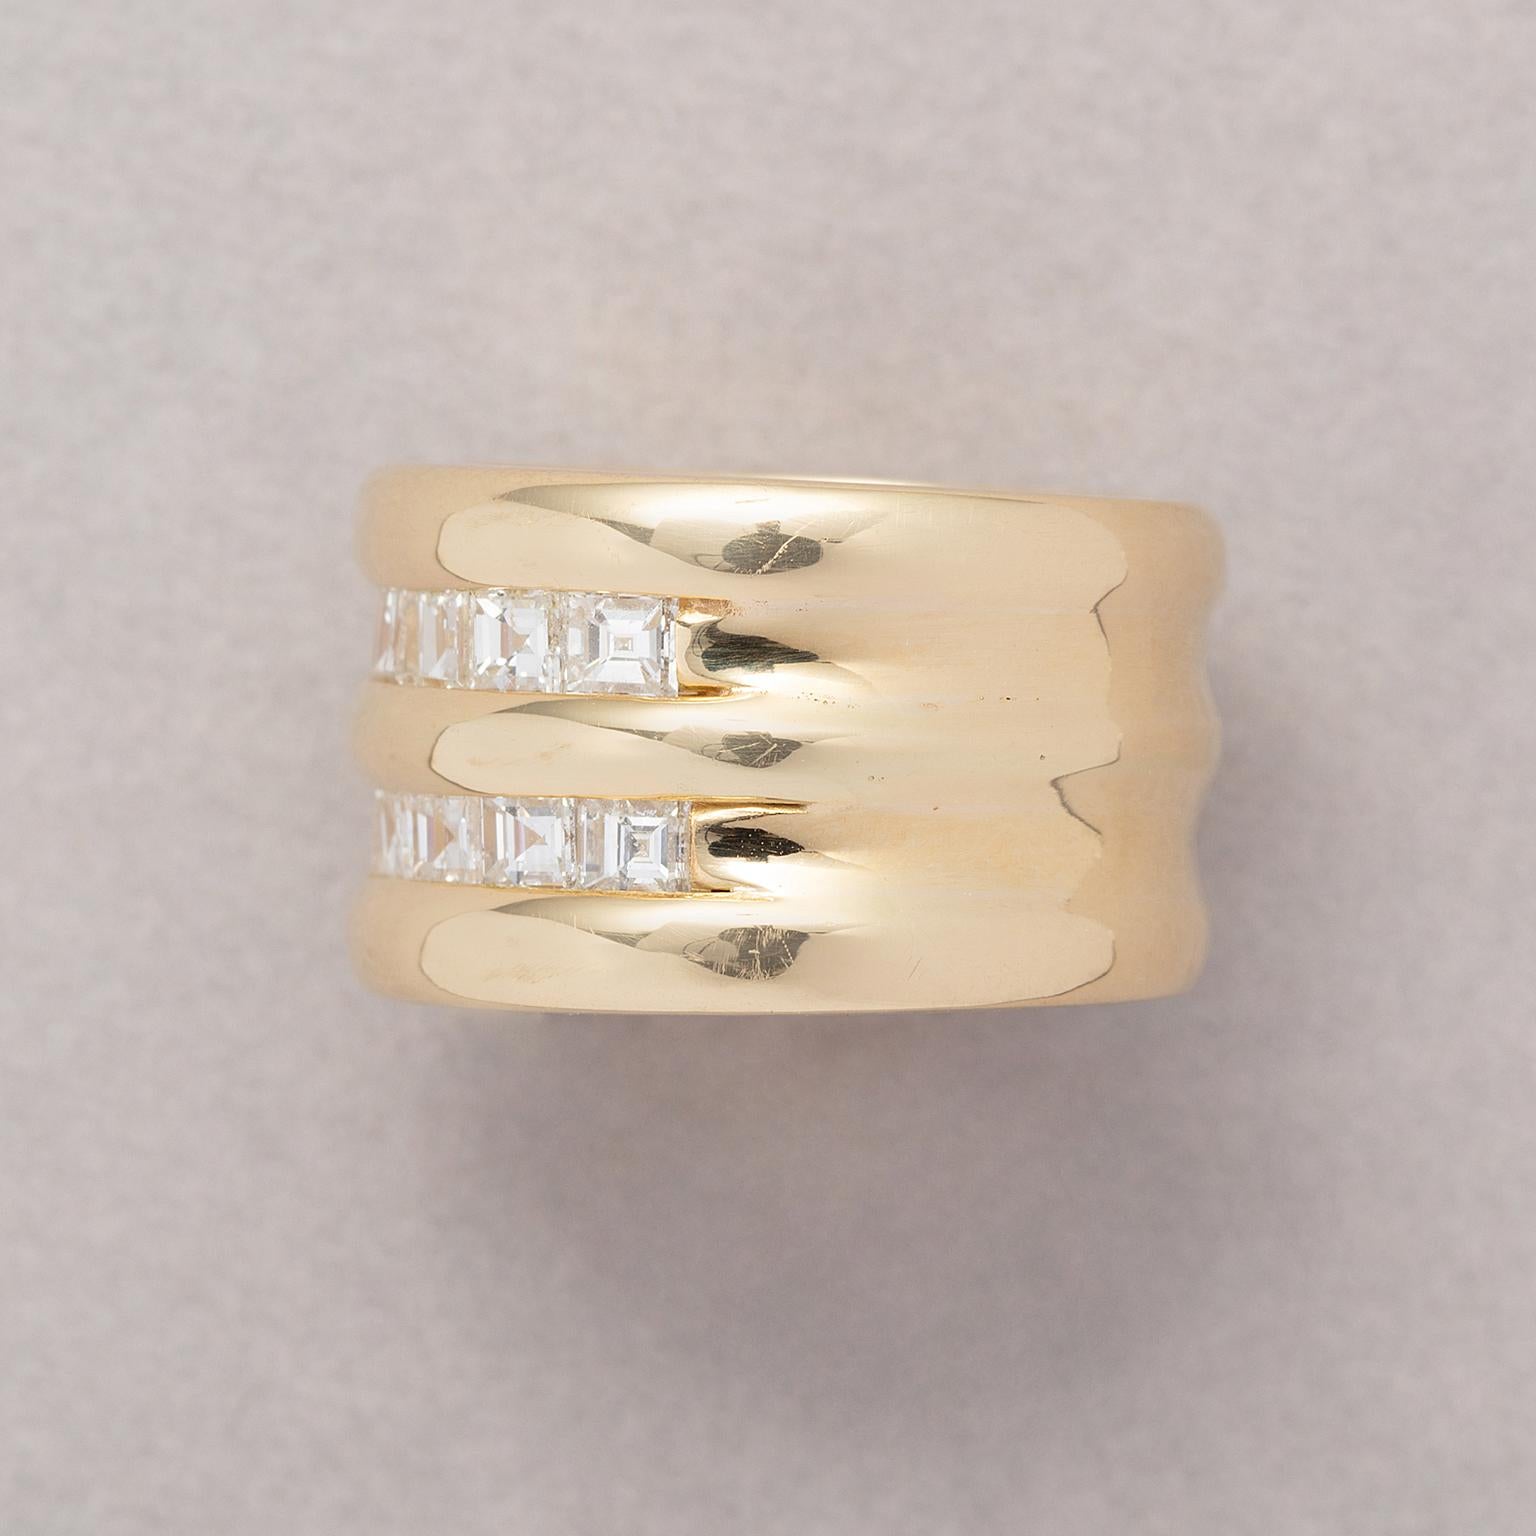 An 14 carat gold wide ring with two rows of carré cut diamonds (app. 1.6 carat in total, G – Vs) pillow set.

weight: 23.88 grams
ring size: 16 mm / 5.5 US
width: 1.2 cm